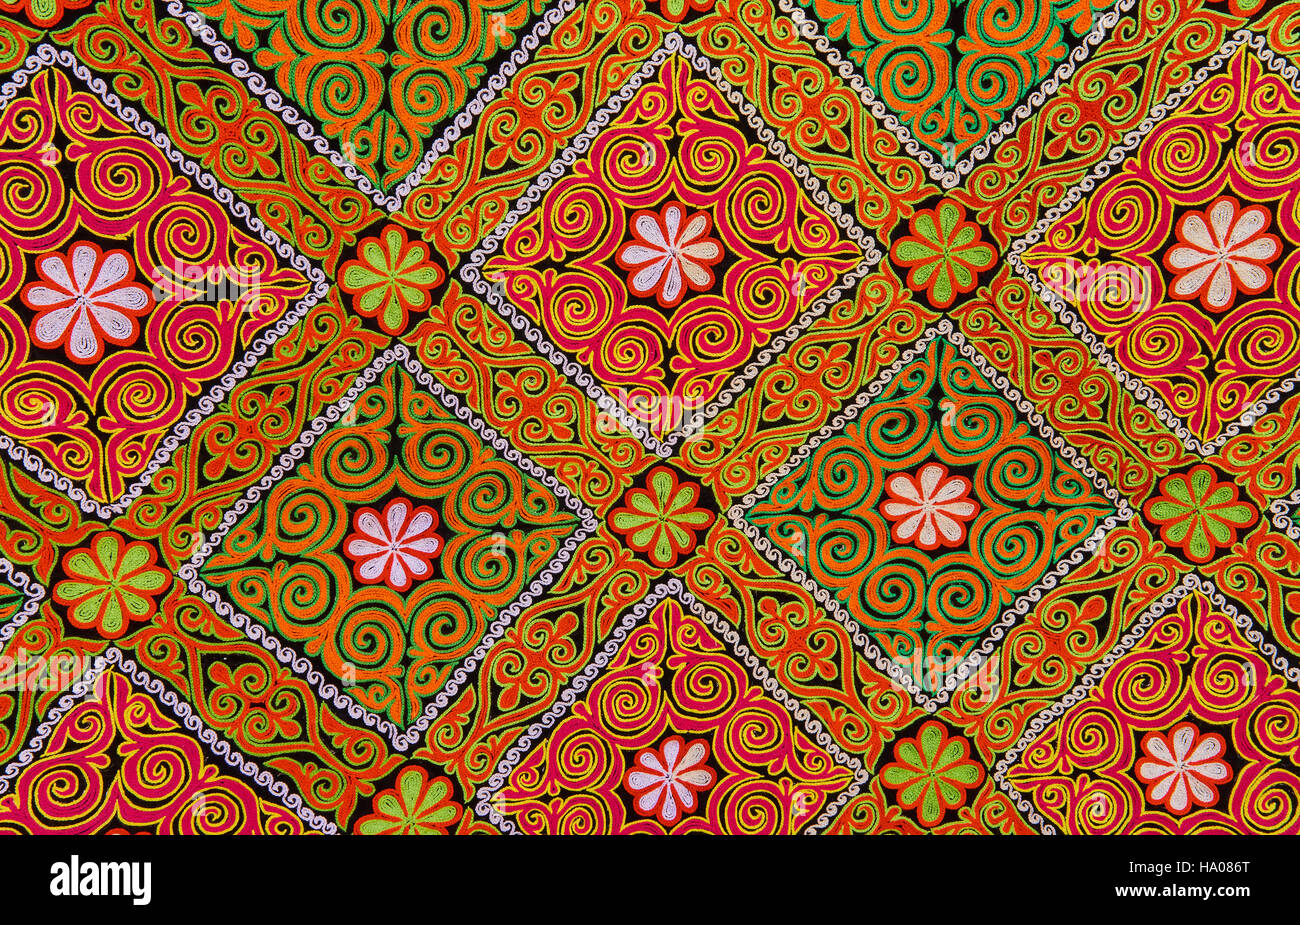 Mongolia, Bayan-Ulgii province, western Mongolia, nomad camp of Kazakh people in the steppe, textile with the pattern decorating the yurt Stock Photo